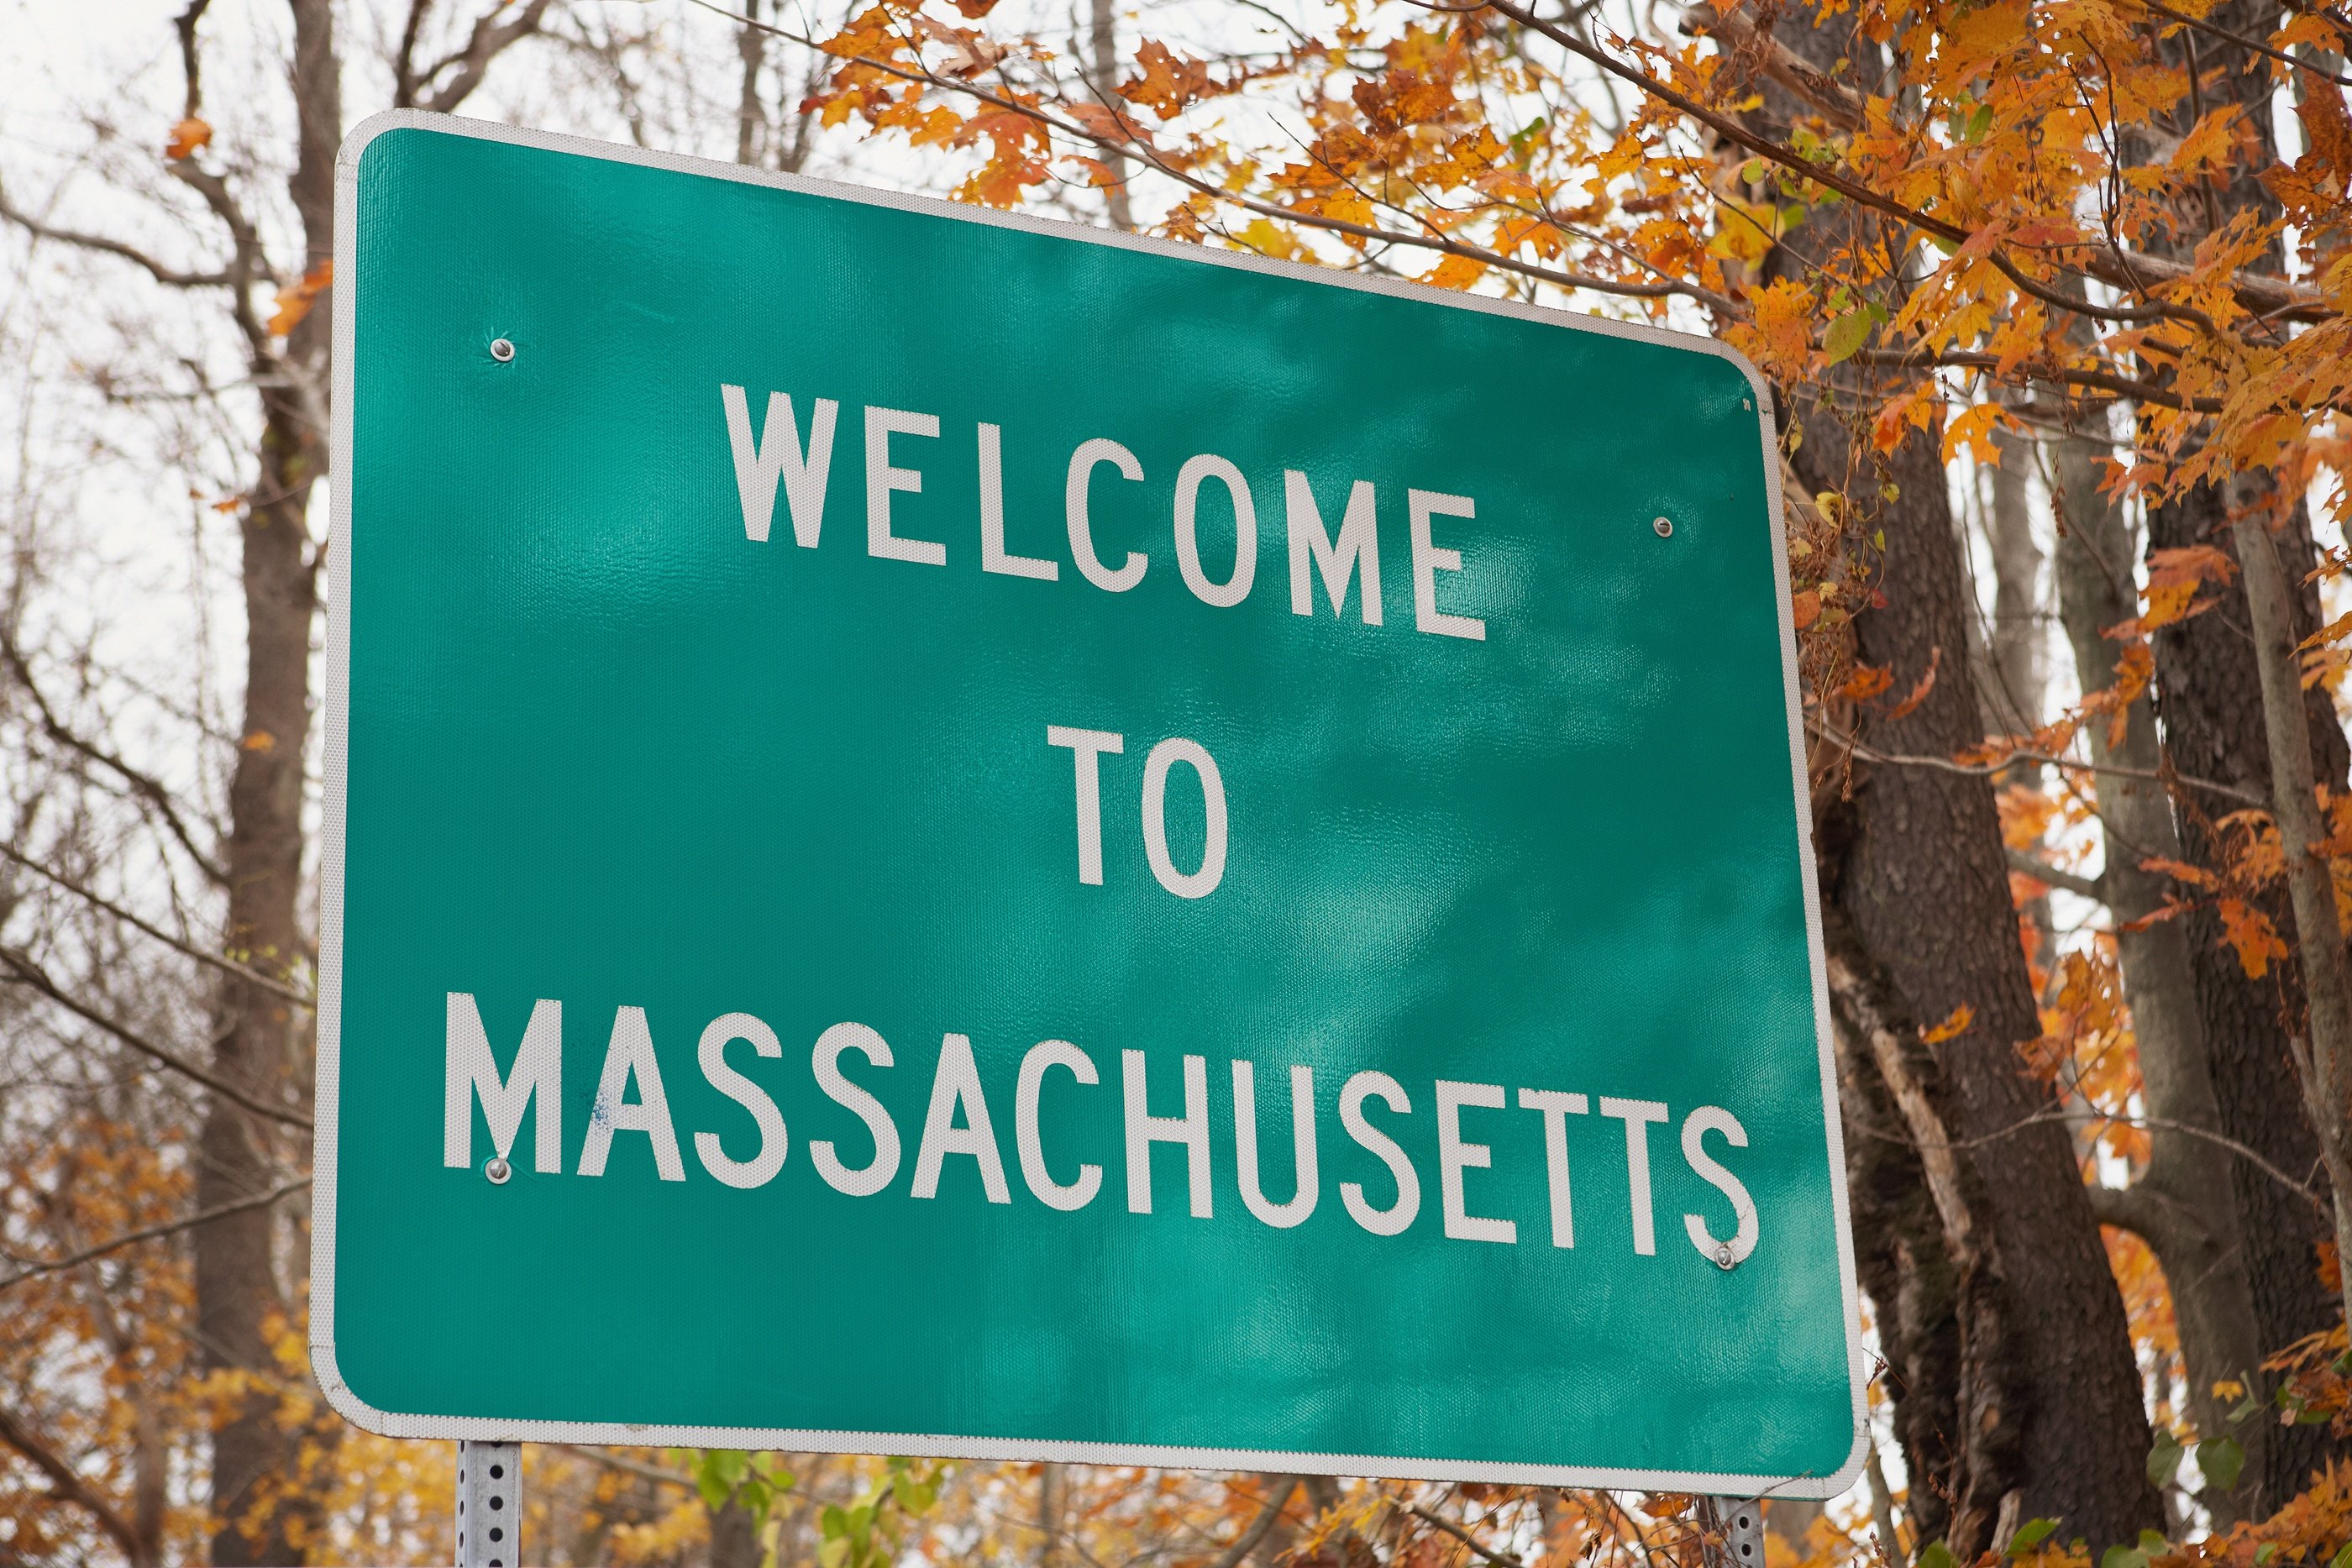 New Energy Code and Stretch Energy Code Adopted by State of Massachusetts